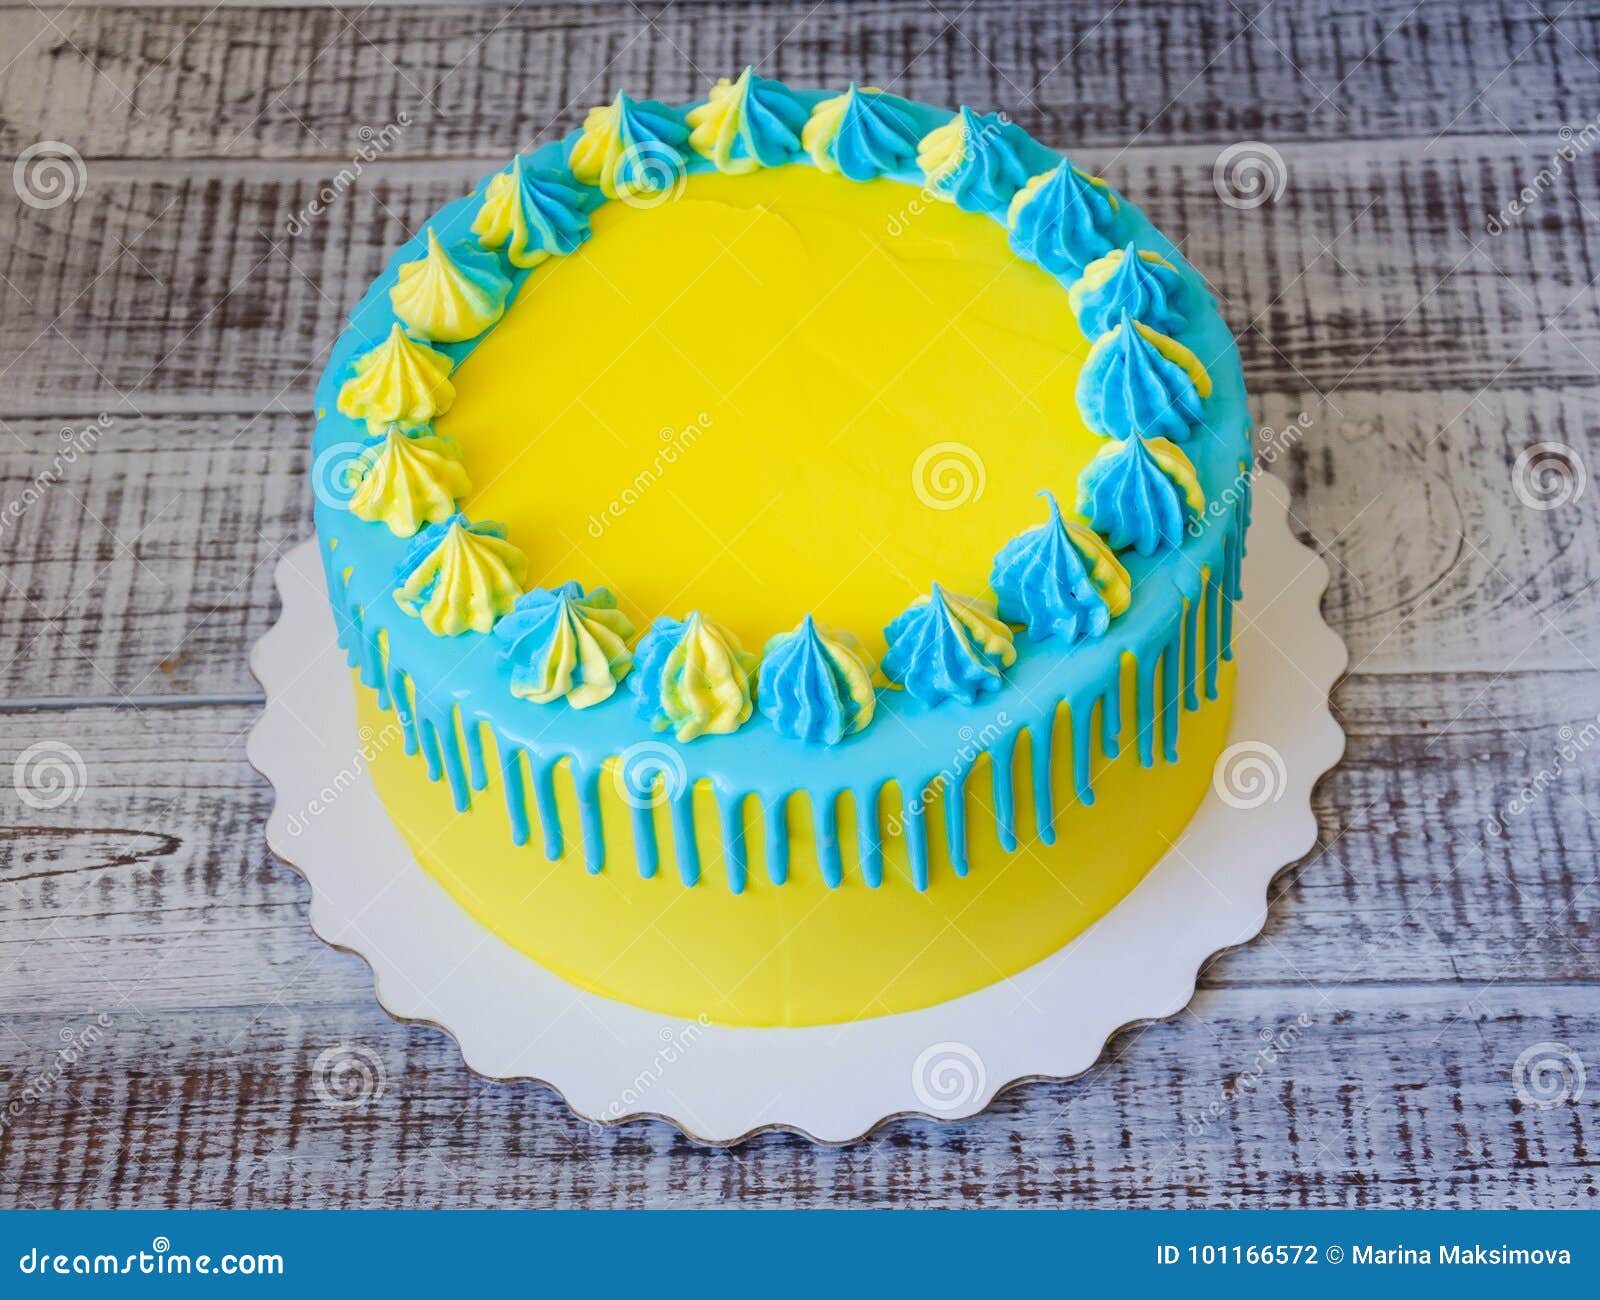 The Cake  Pineapple yellow colour cake Groomed with  Facebook